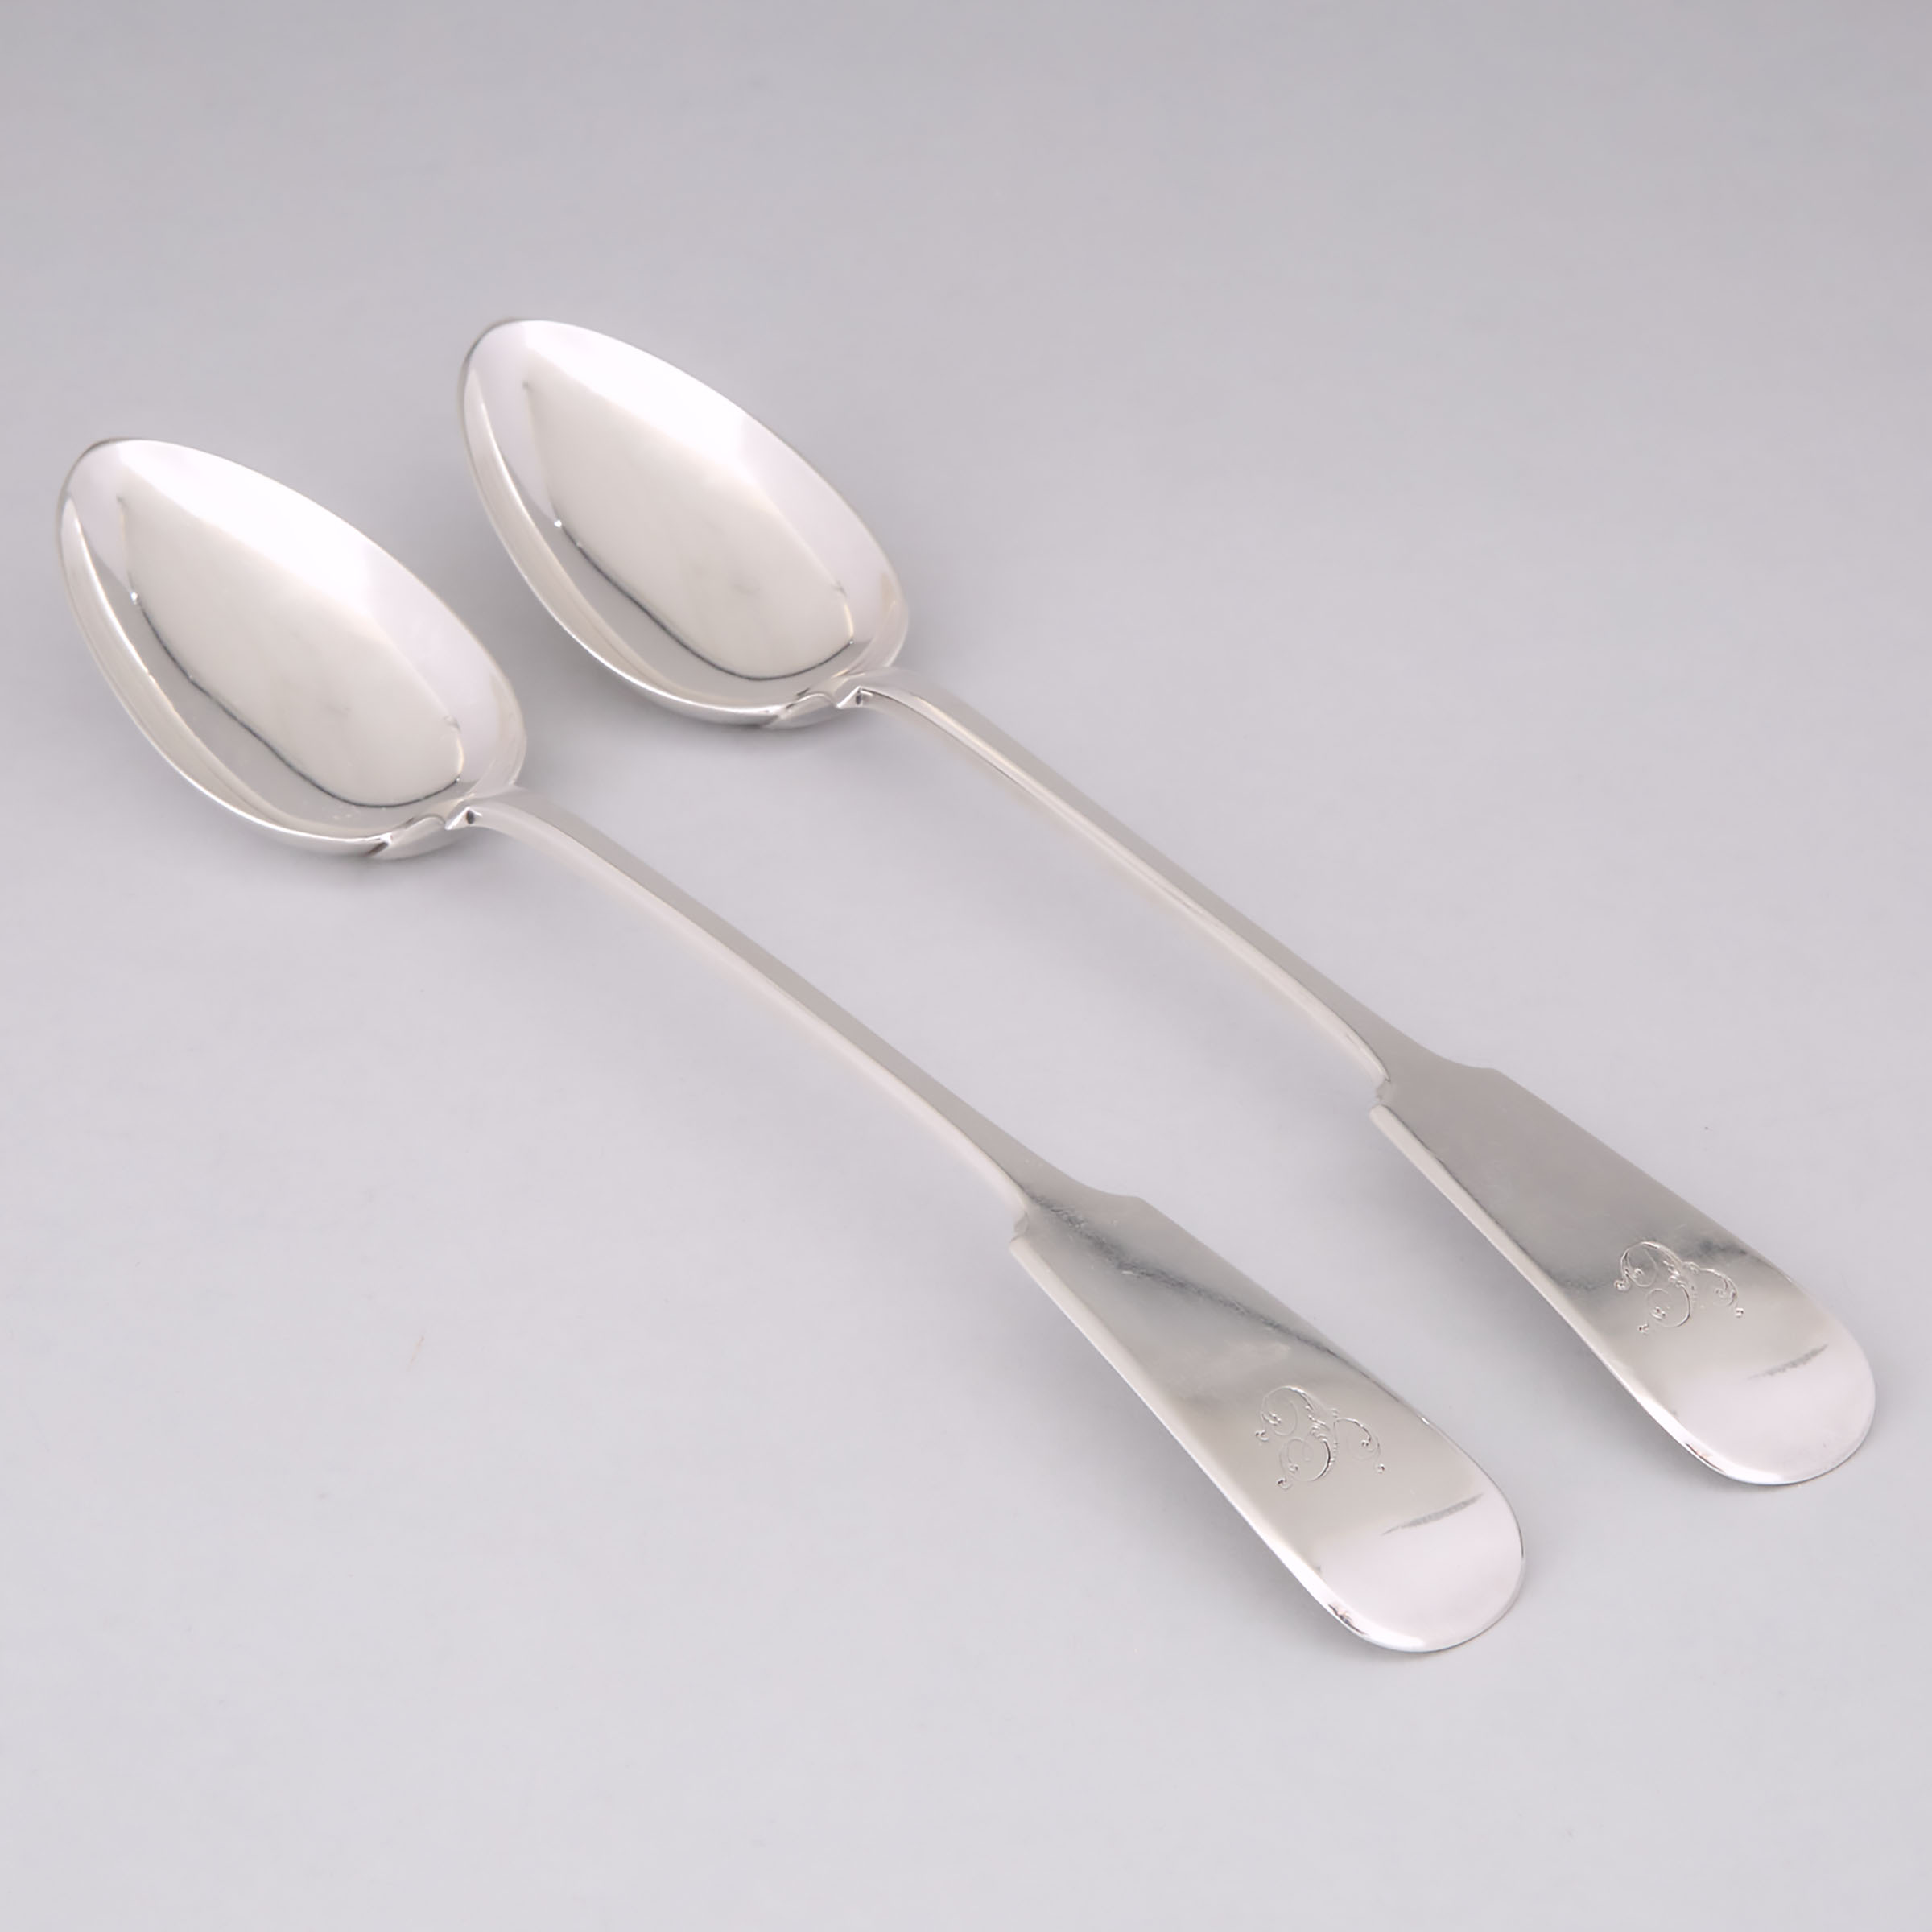 Pair of William IV Scottish Silver Fiddle Pattern Serving Spoons, Glasgow, 1837